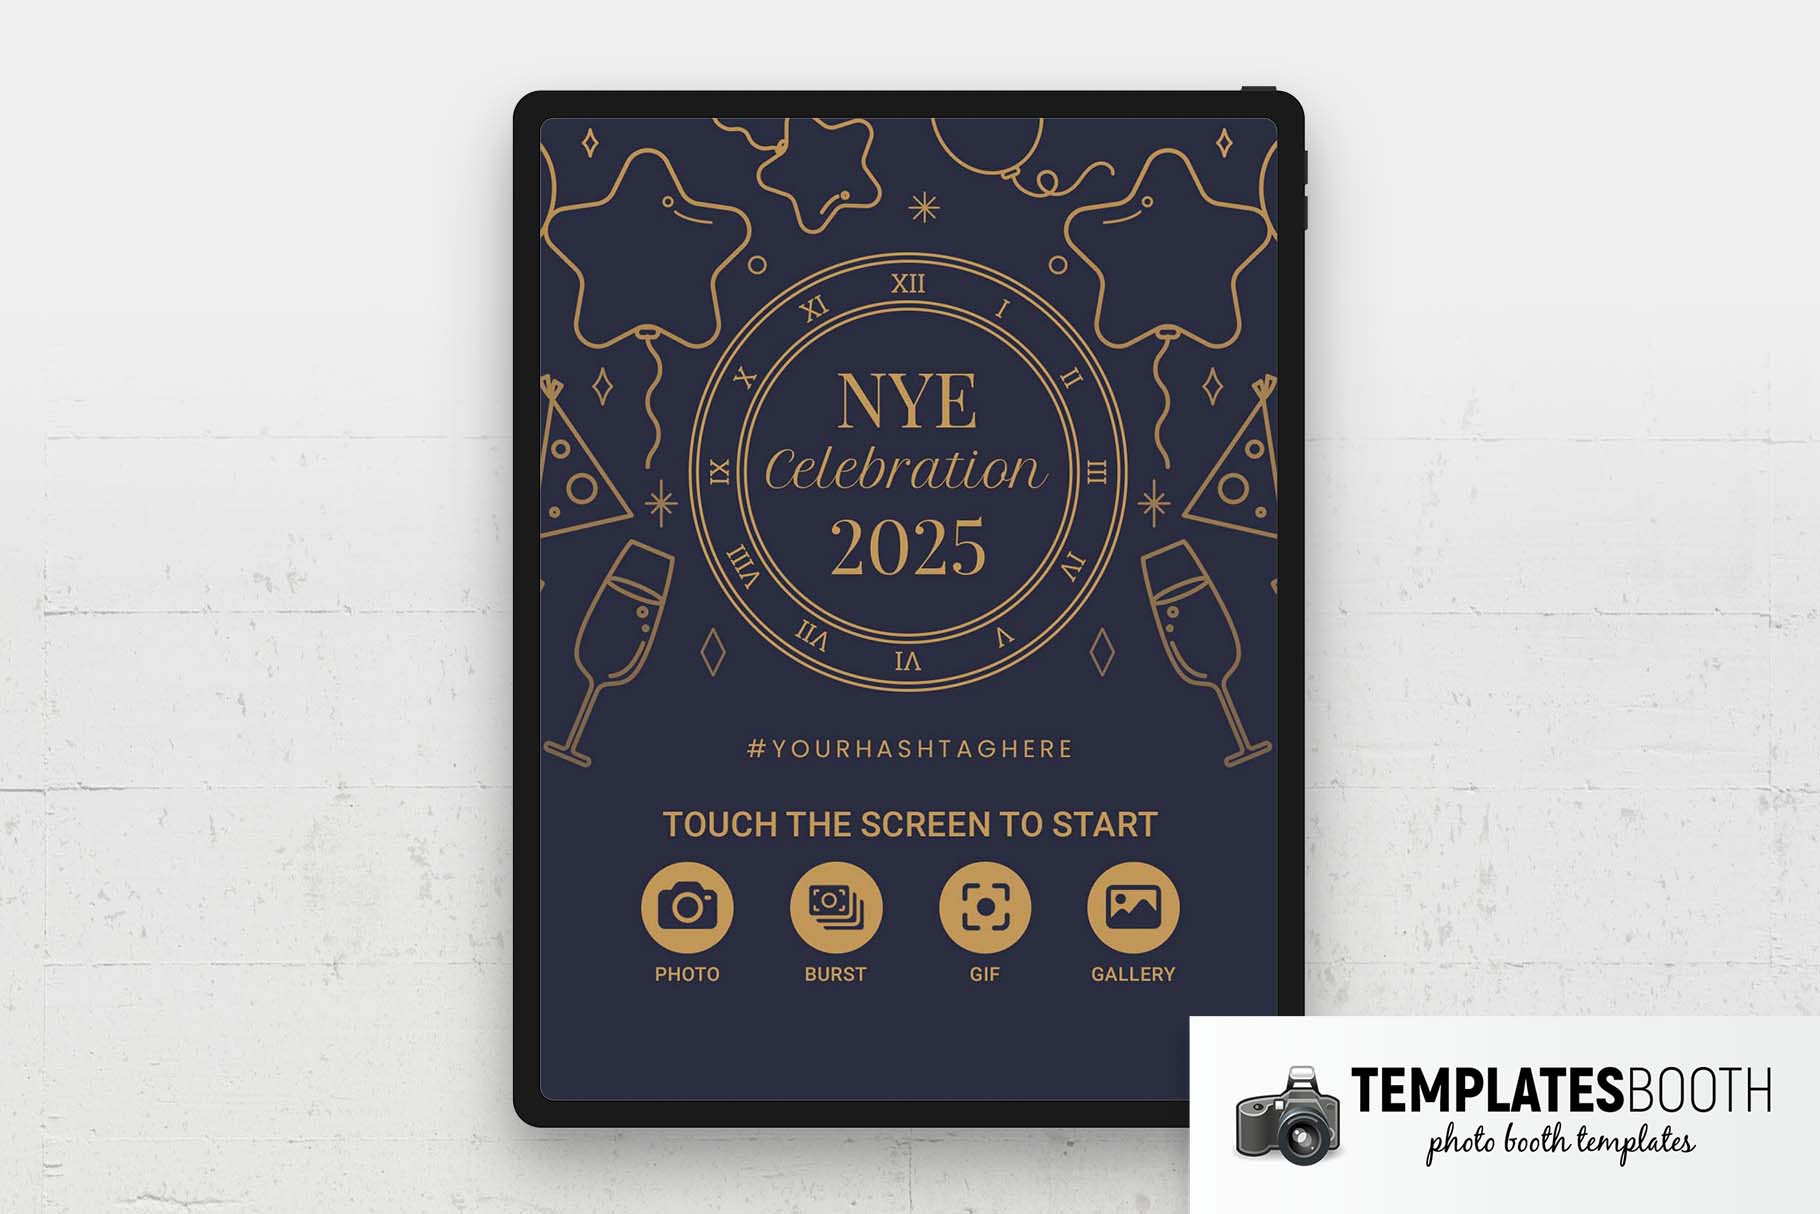 Ornate New Year's Eve Photo Booth Welcome Screen